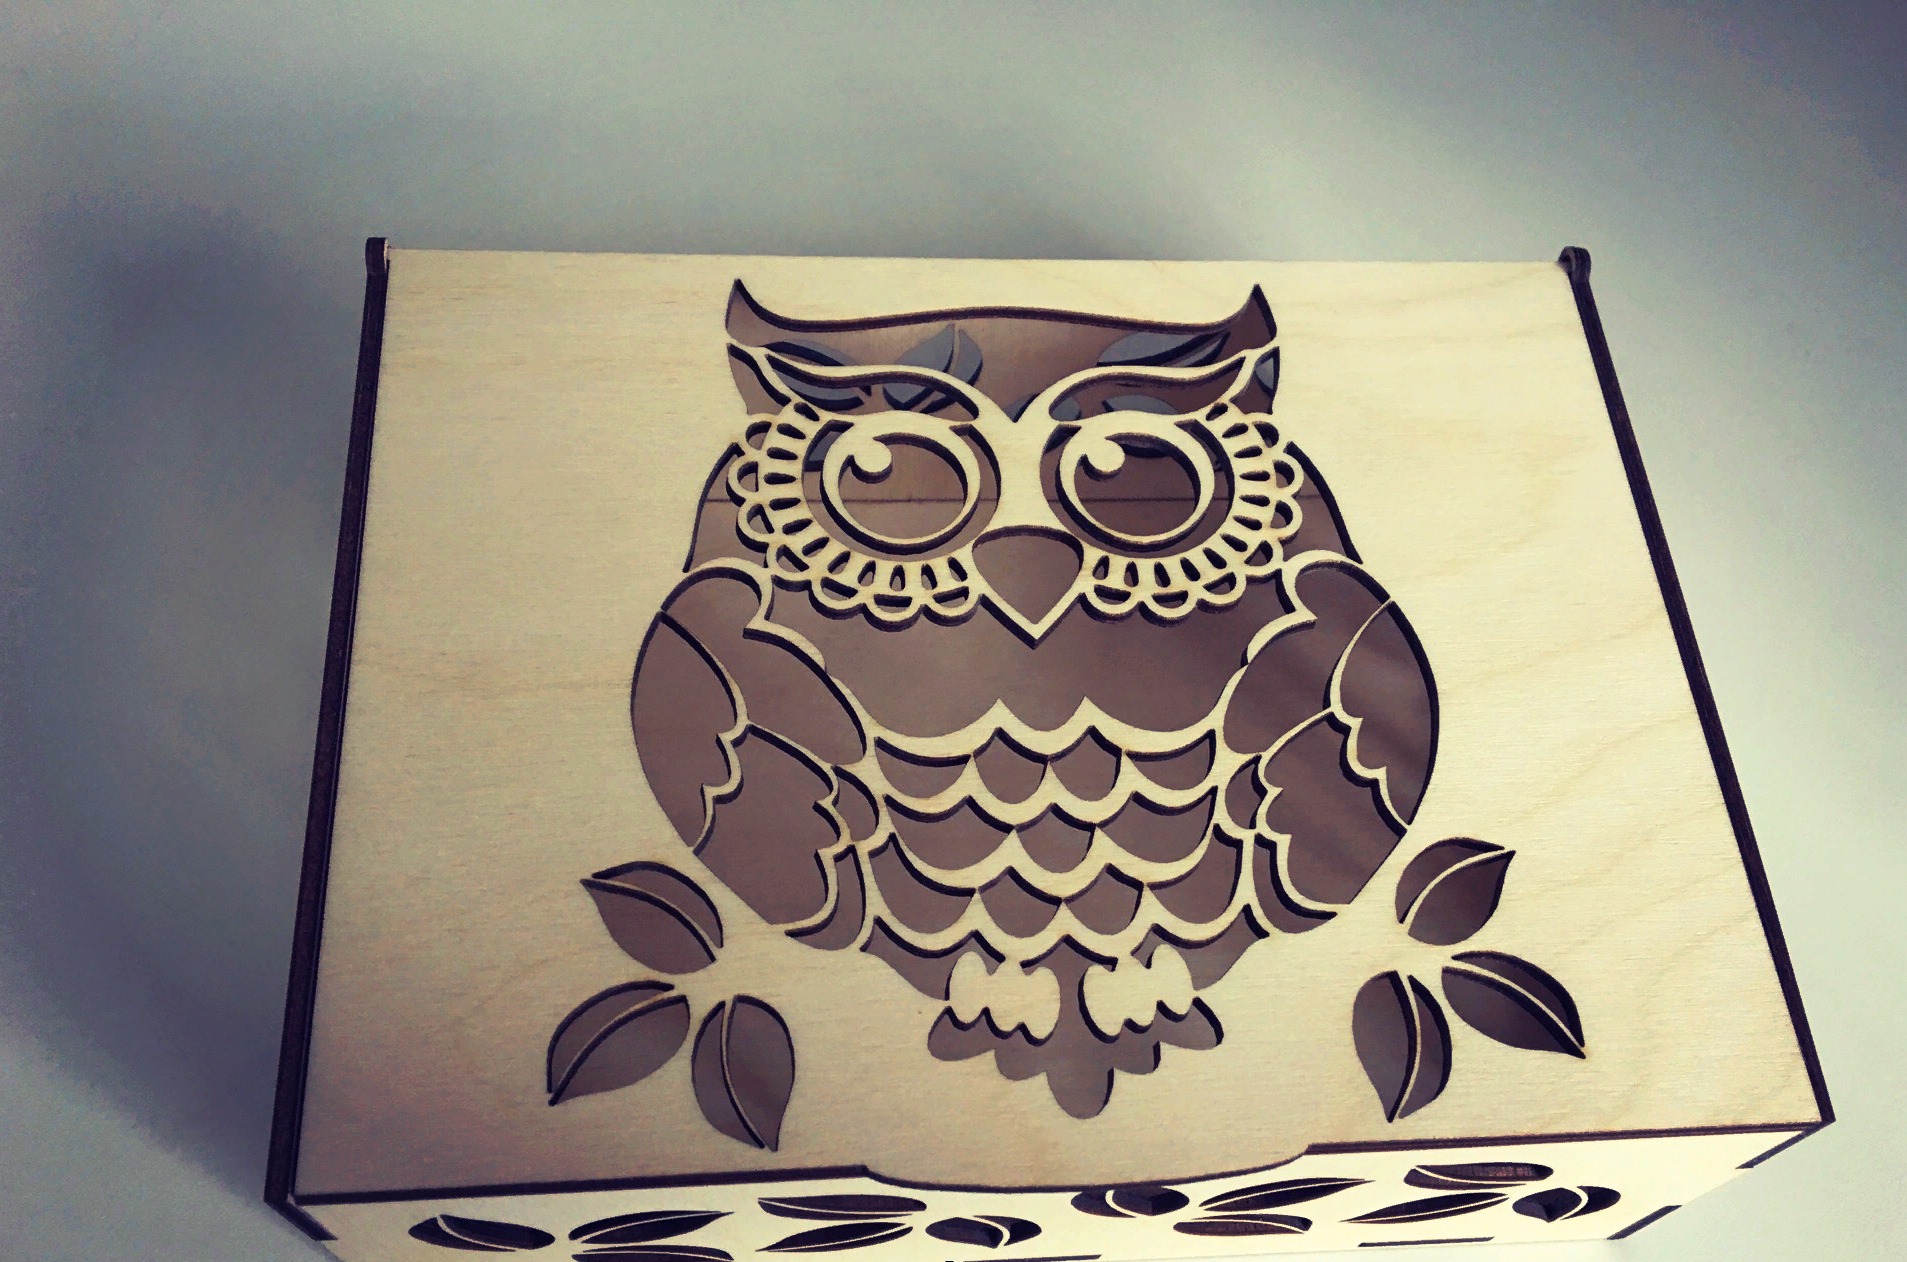 laser-cut-box-with-lid-template-free-vector-cdr-download-3axis-co